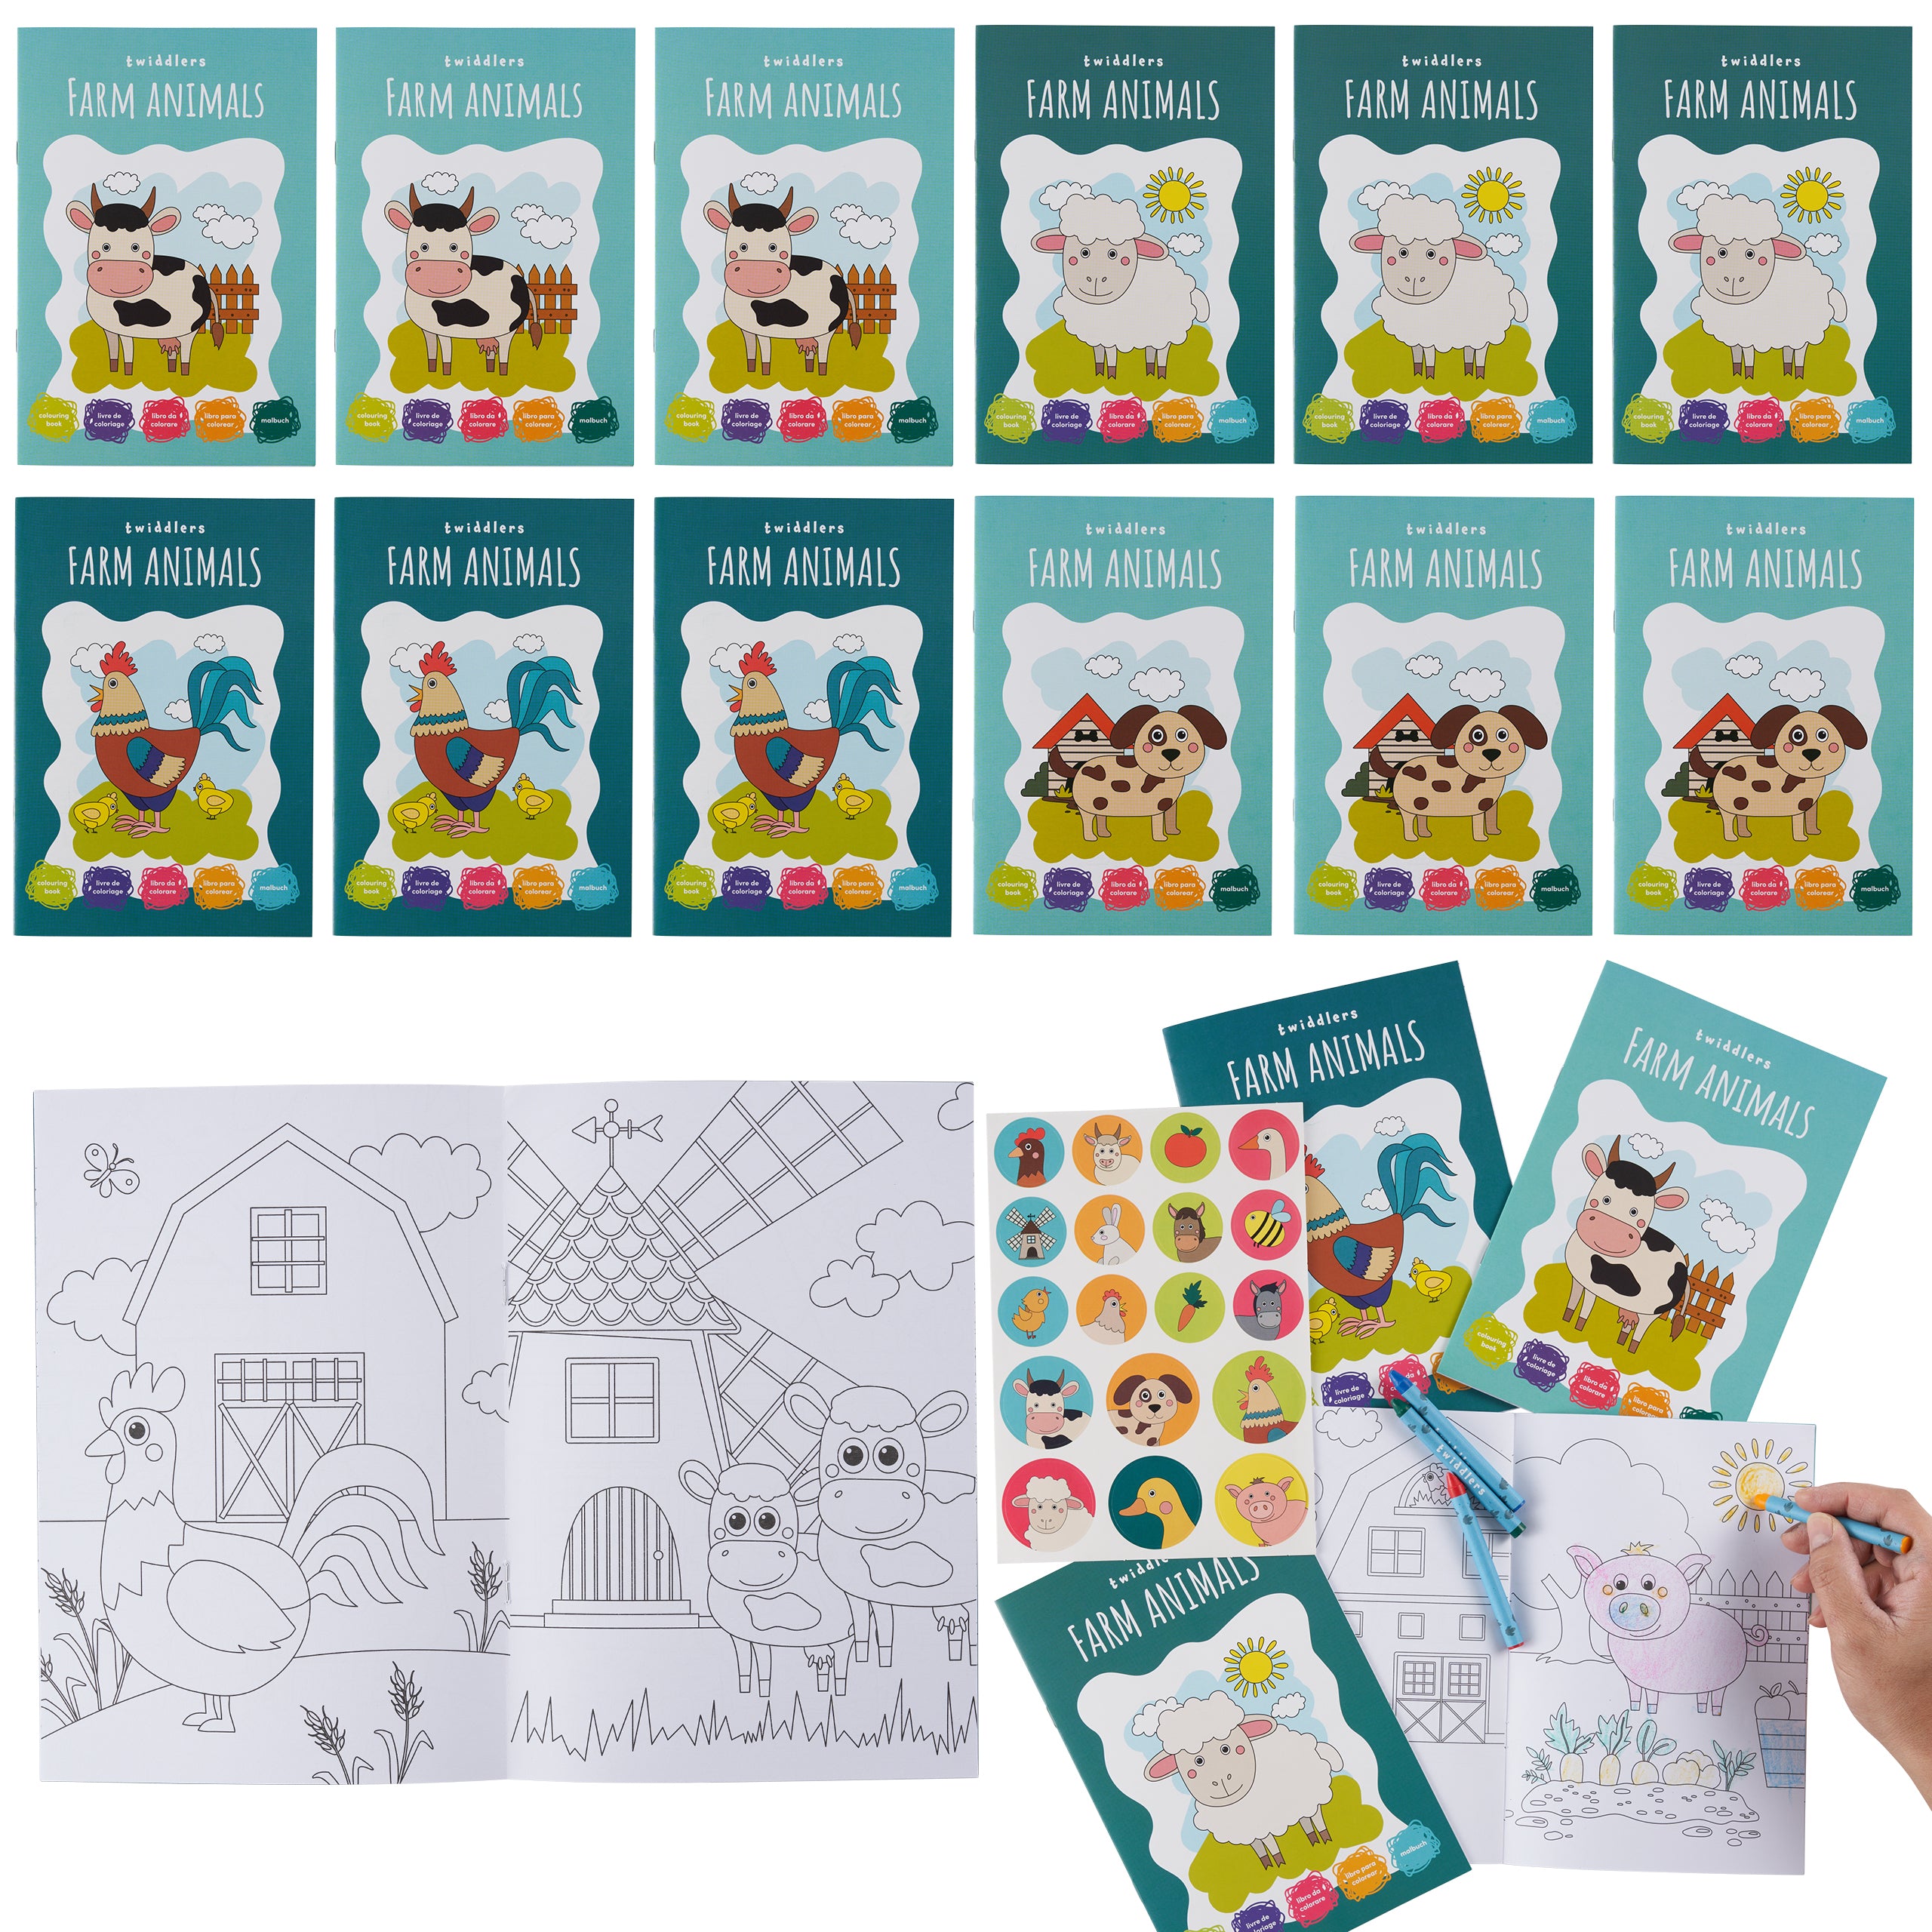 12 Farm Animals Colouring Books with Crayons & Stickers